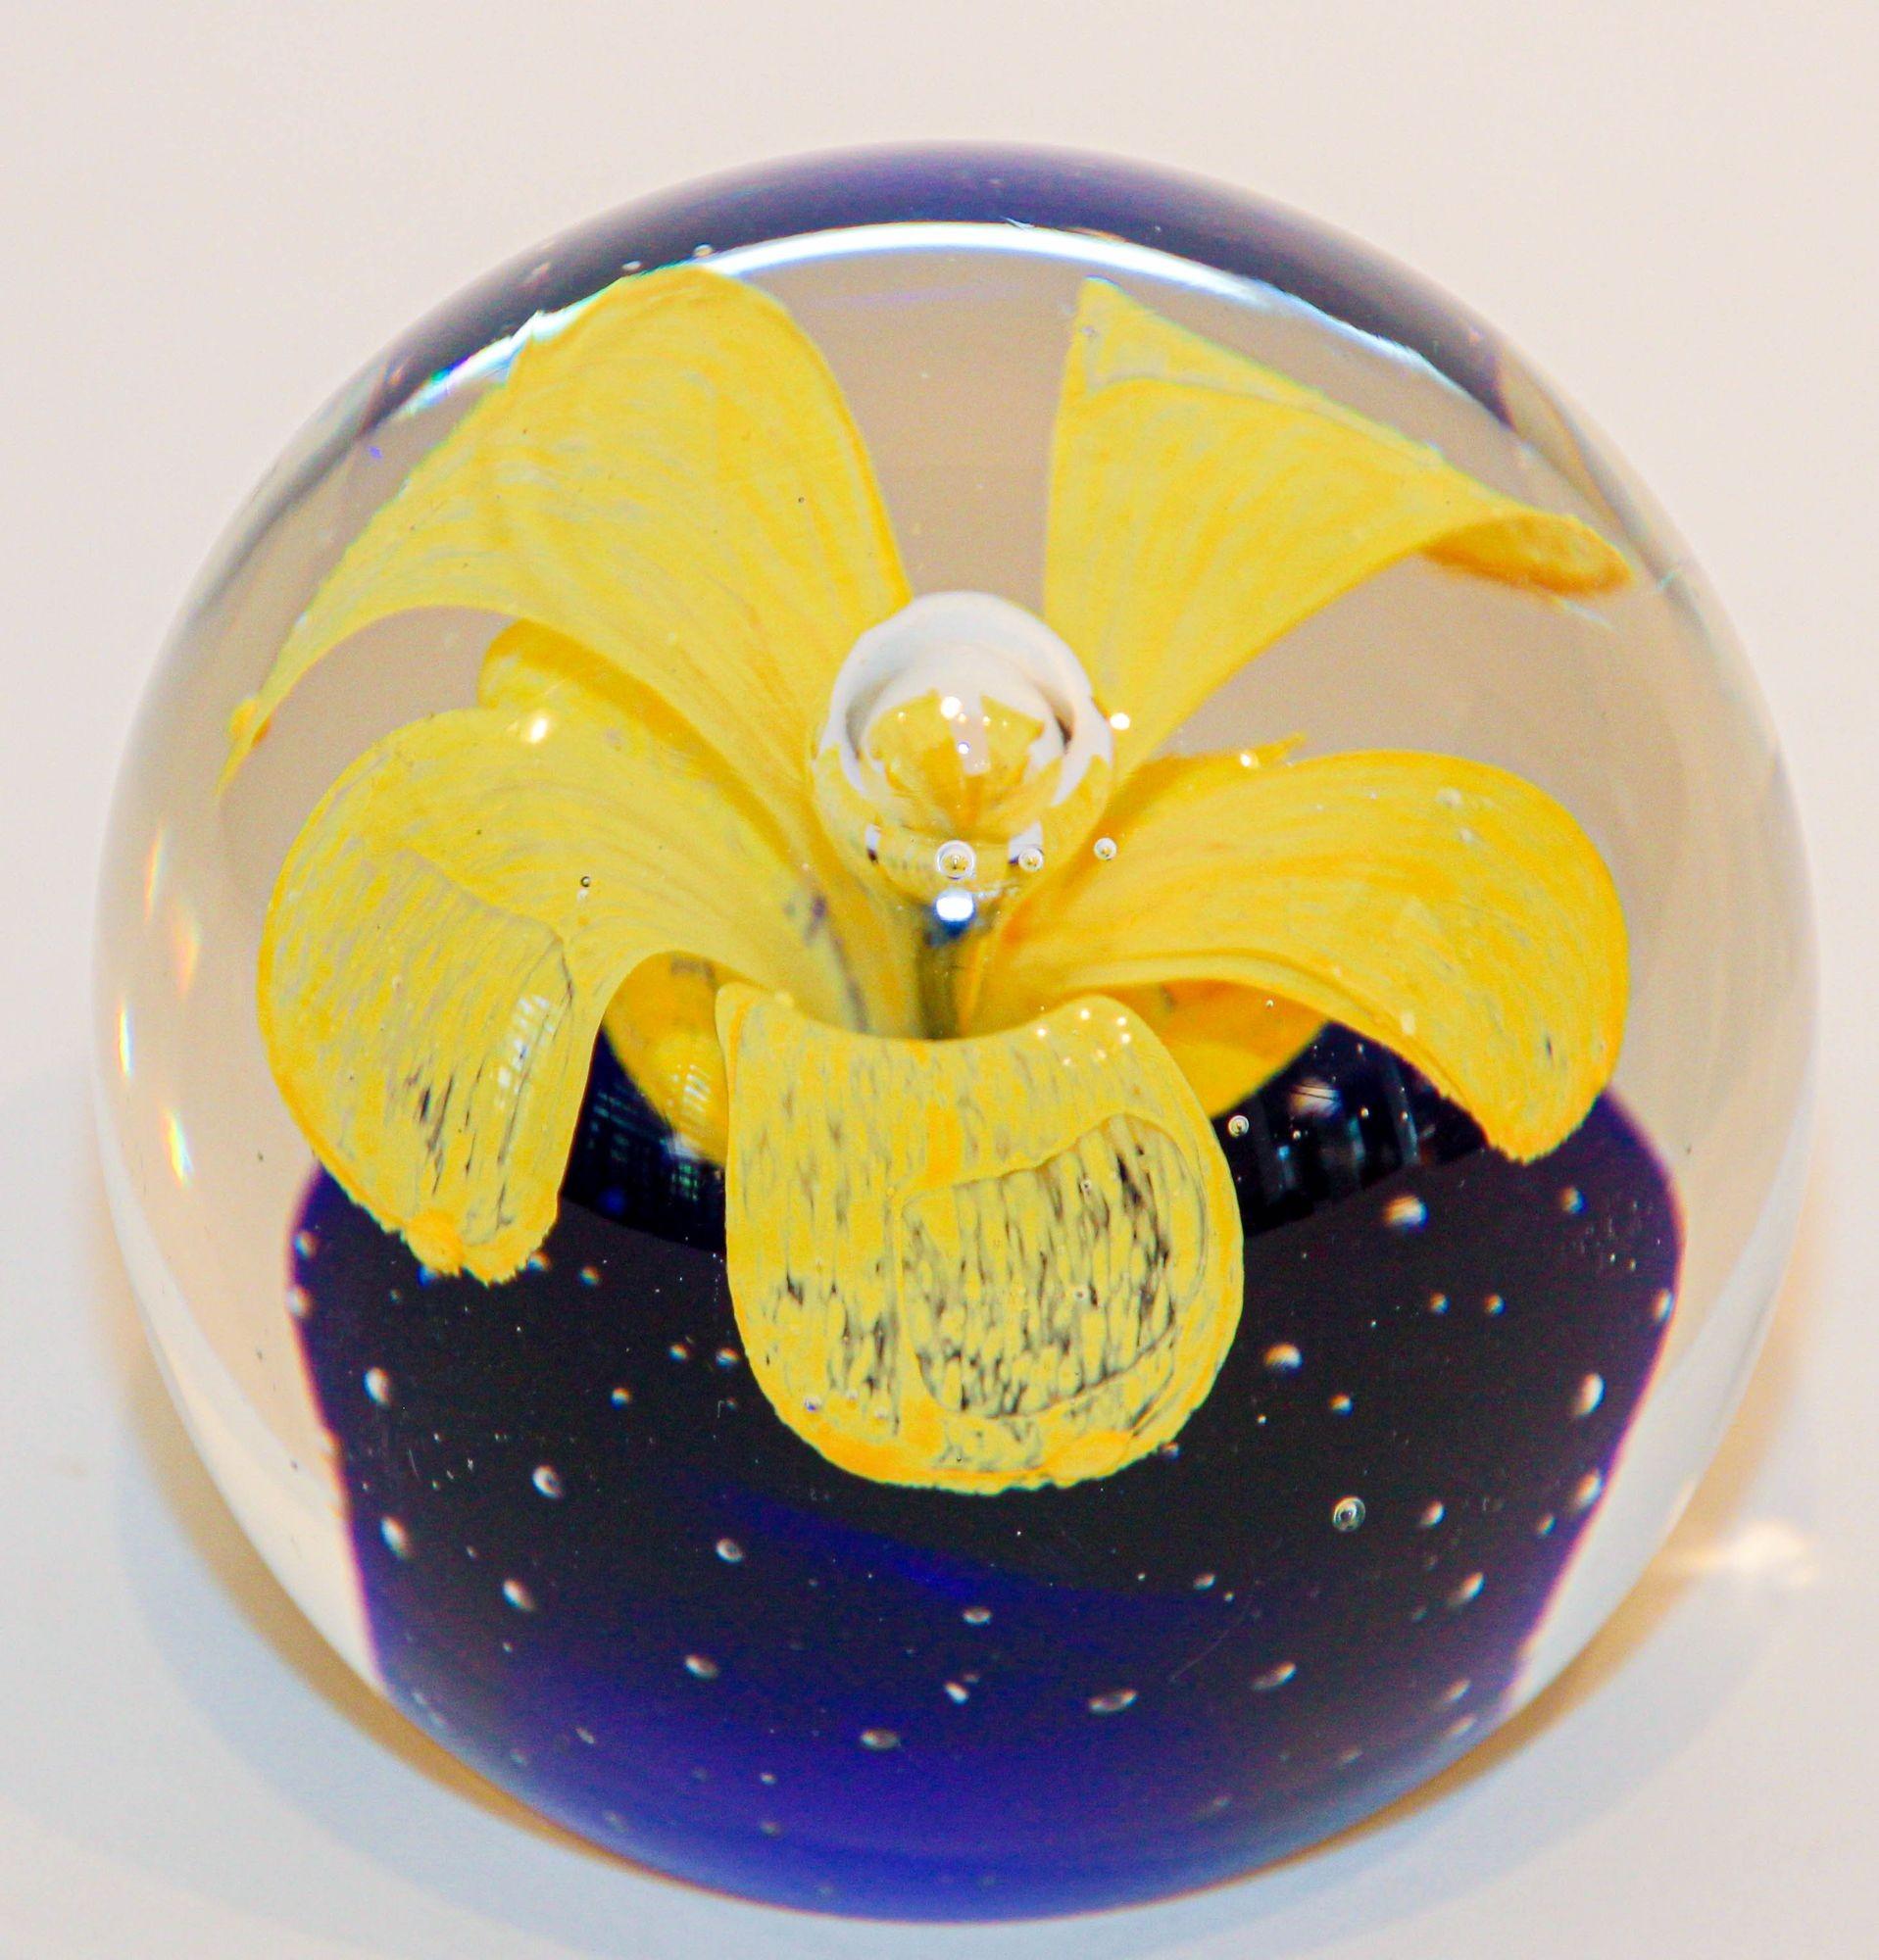 Vintage Murano Hand Blown Paperweight Yellow Flower with Blue Collectible Art Glass.
Beautiful heavy large glass paperweight featuring yellow in a blue base flower blown design inside, has flat bottom.
Art glass paperweight featuring a large